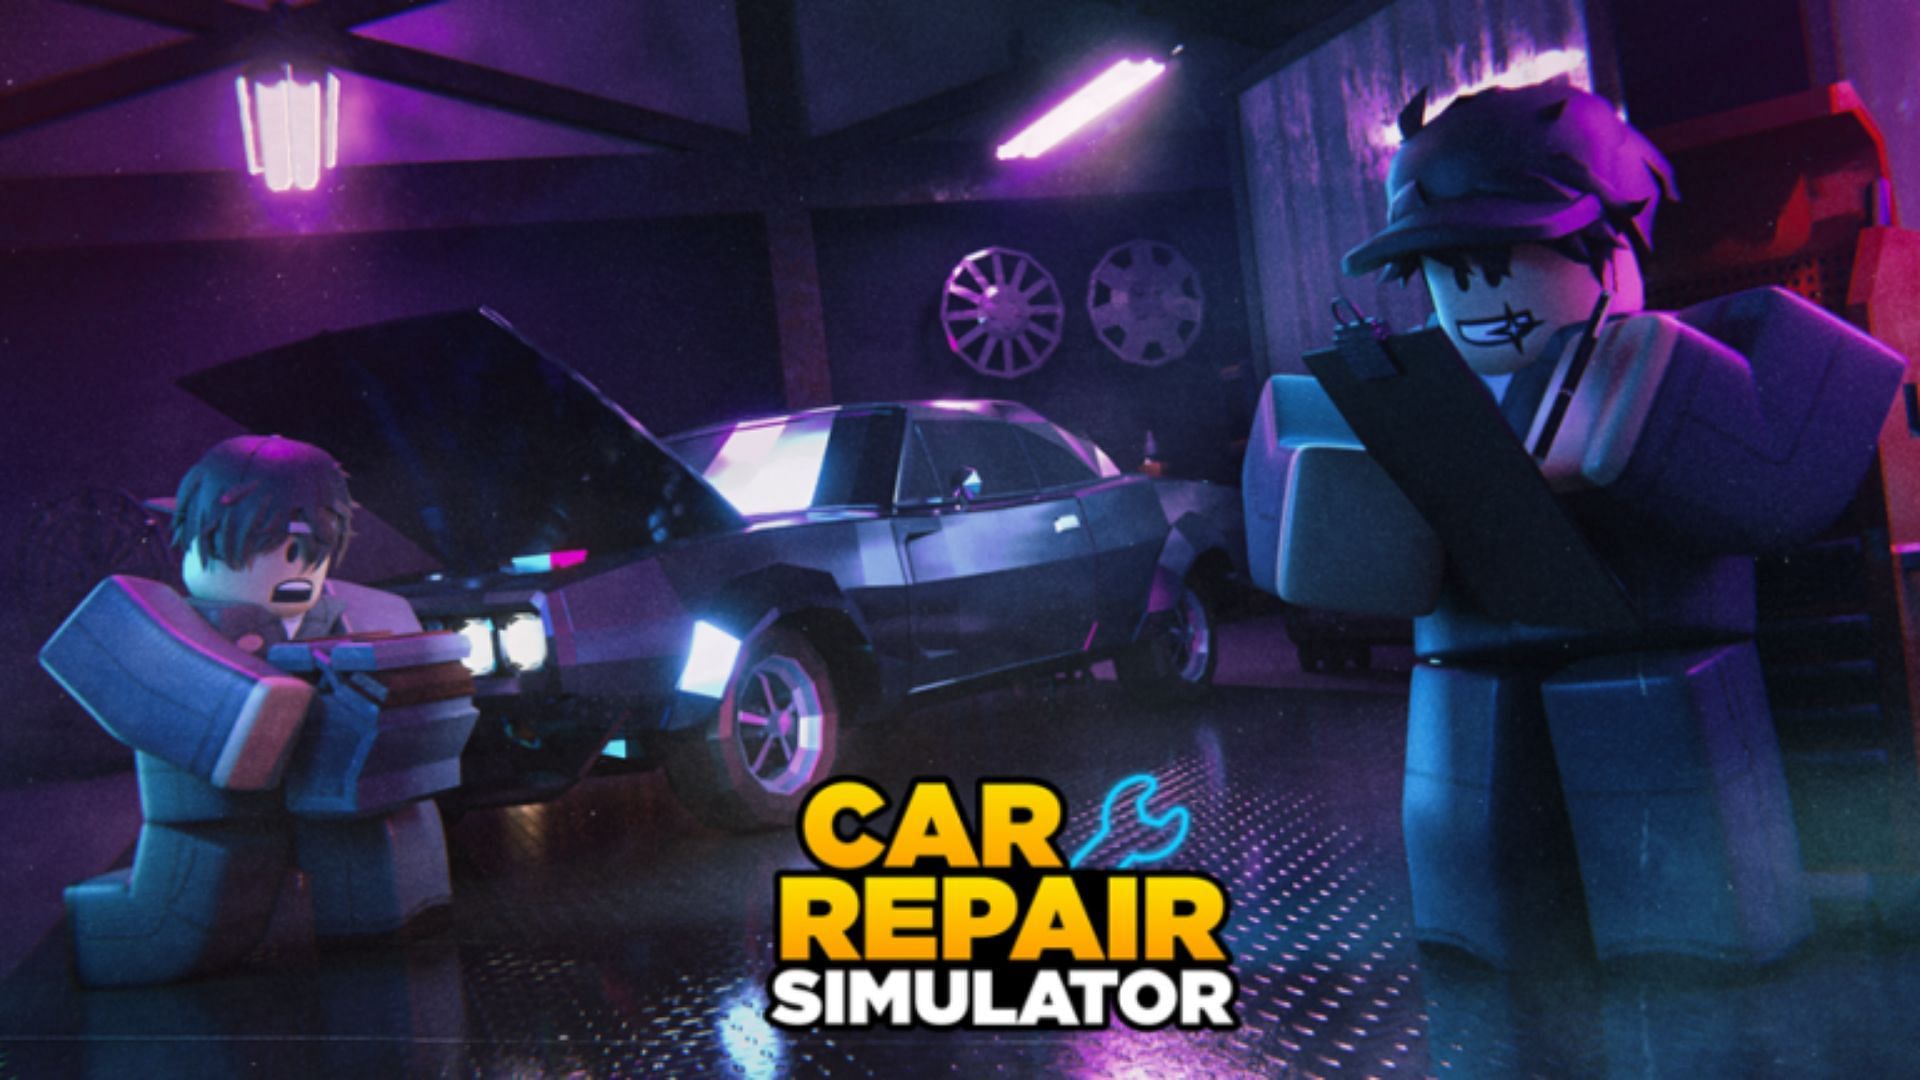 Codes for Car Repair Simulator and their importance (Image via Roblox)